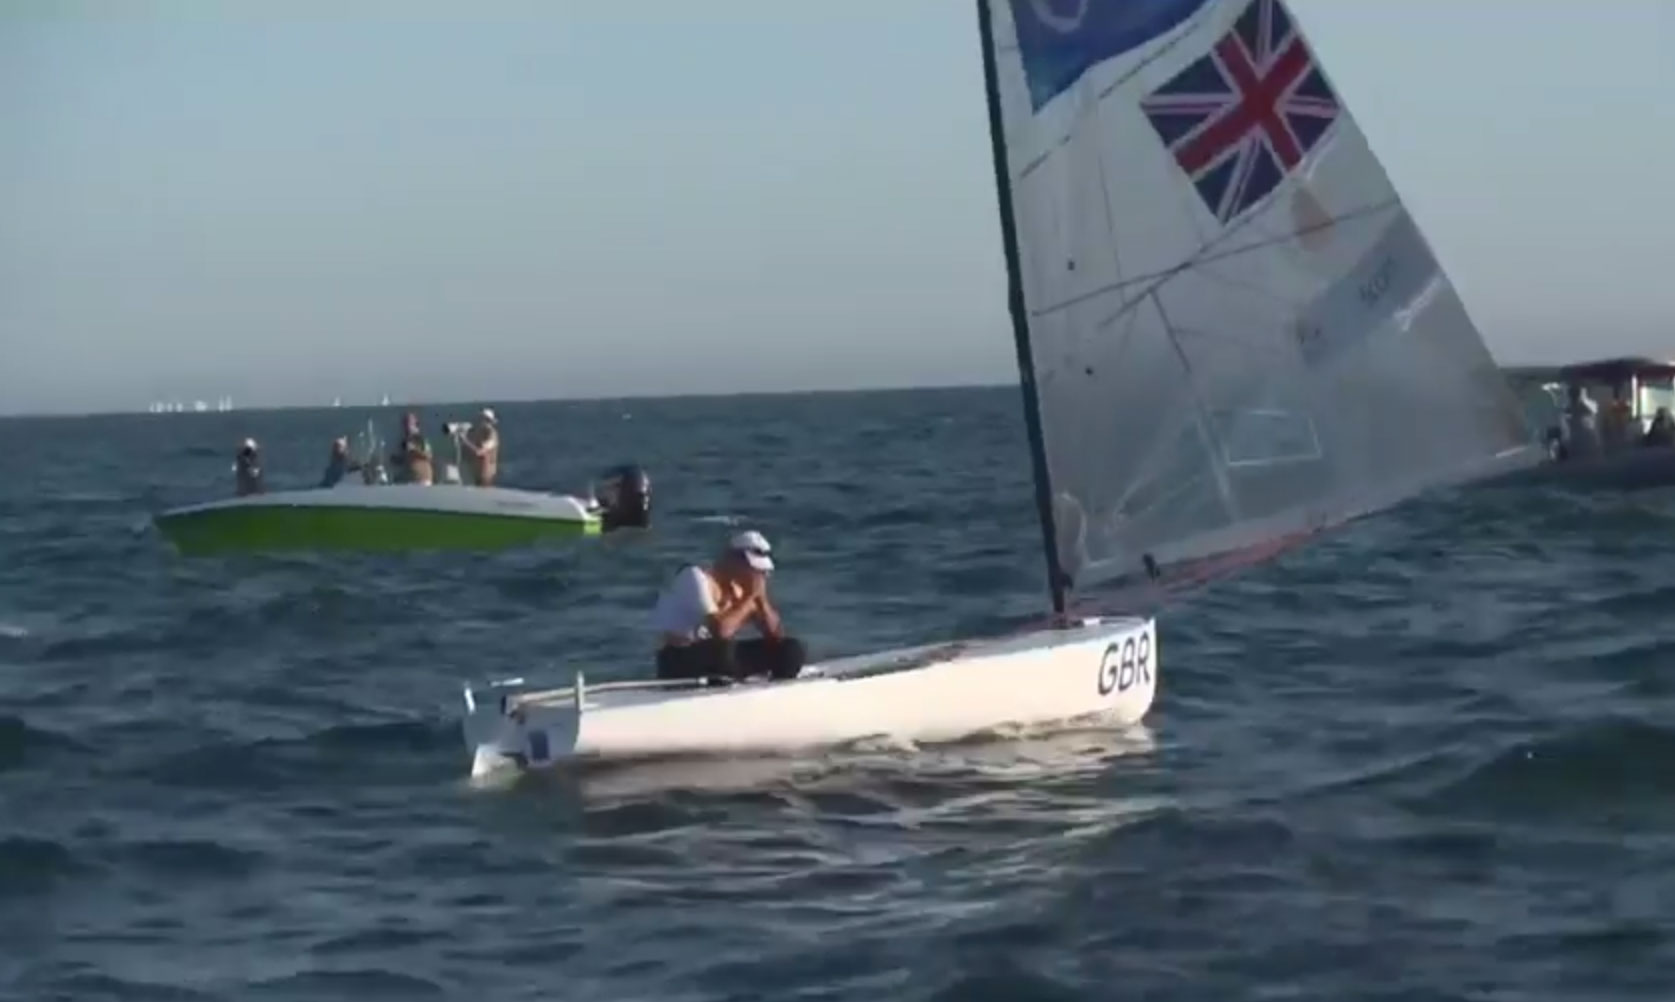 Team-GB-Sailor-Giles-Scott-Wins-Gold-Medal-Overcome-With-Emotion